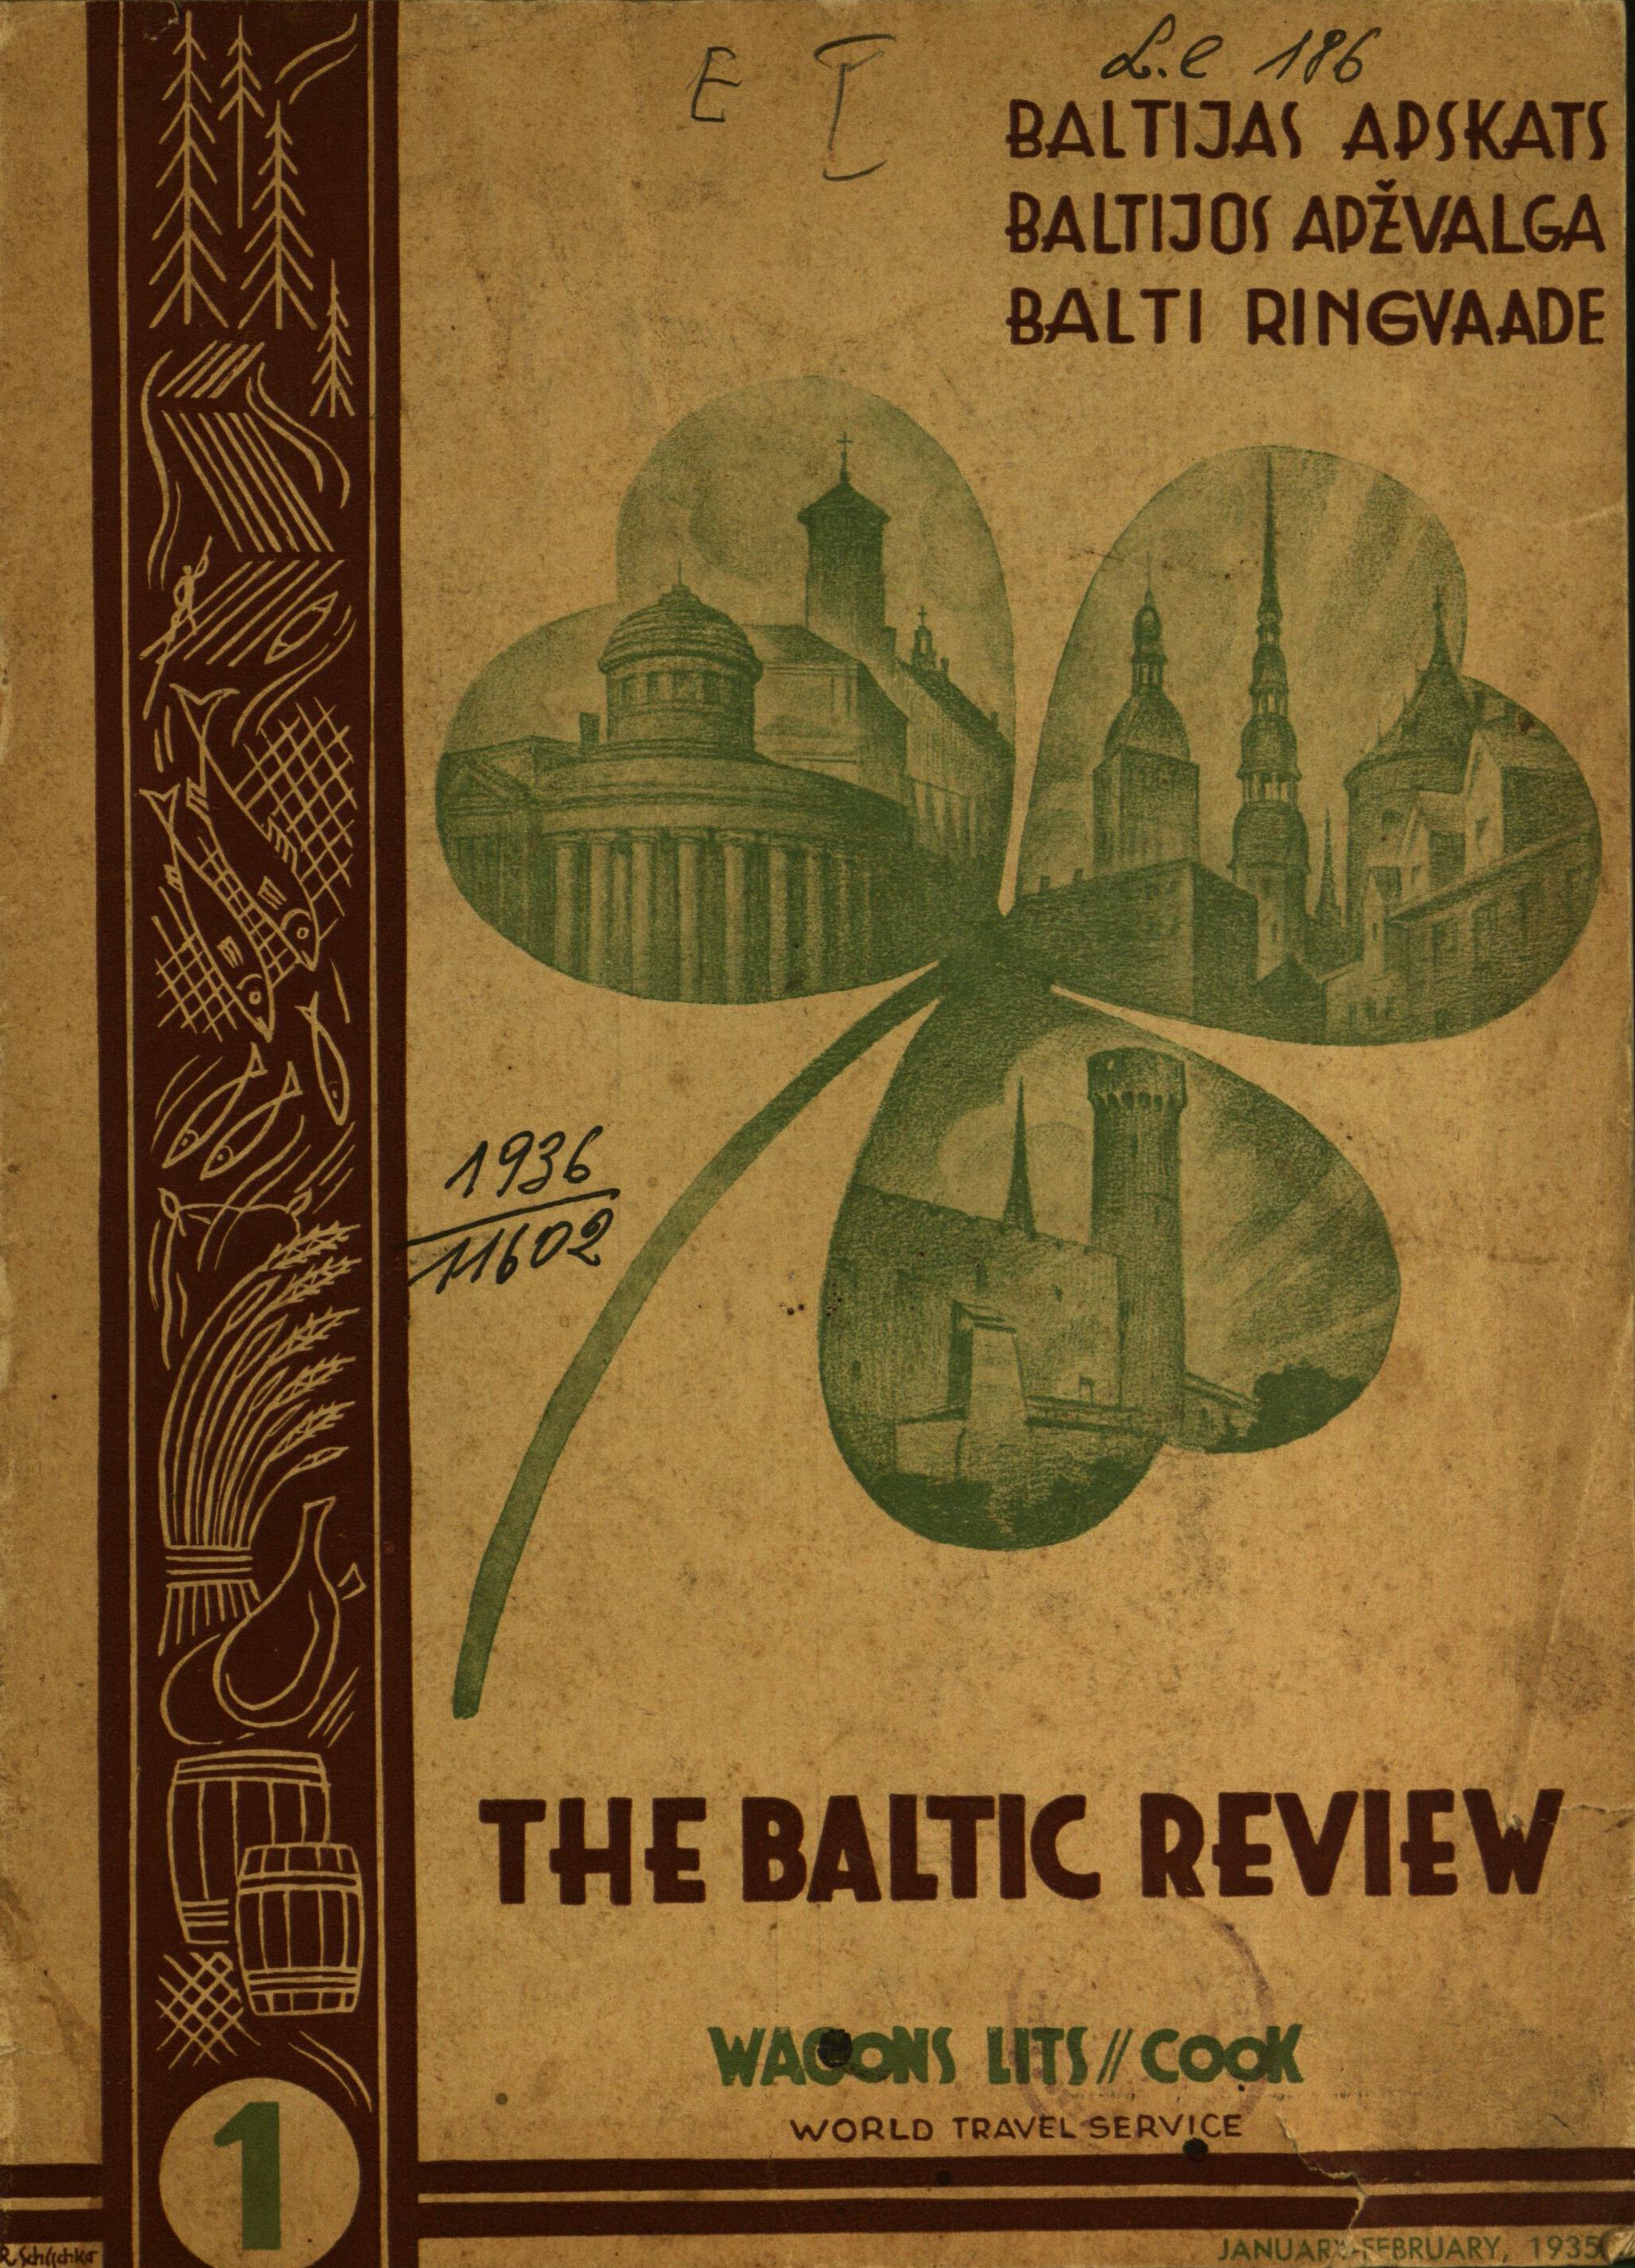 The Baltic review. - 1935-